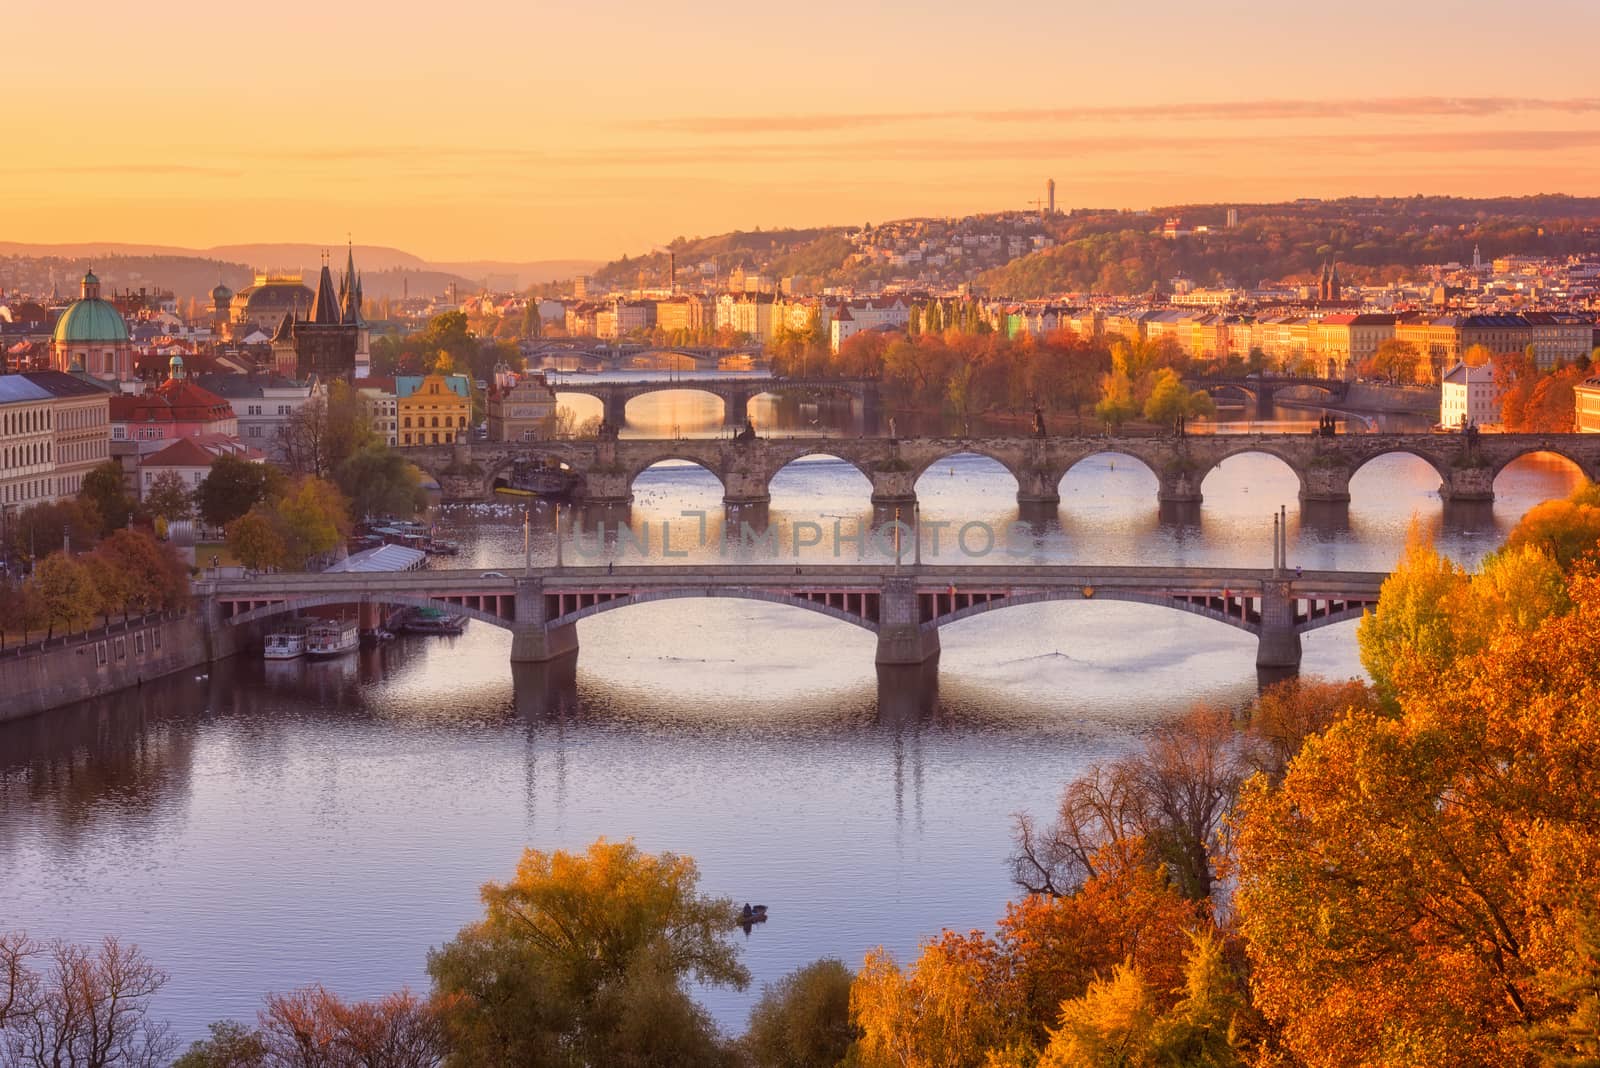 View to the historical bridges, Prague old town and Vltava river from popular view point in the Letna park (Letenske sady), beautiful autumn landscape in soft sunset light with amazing colorful cloudy sky, Czech Republic